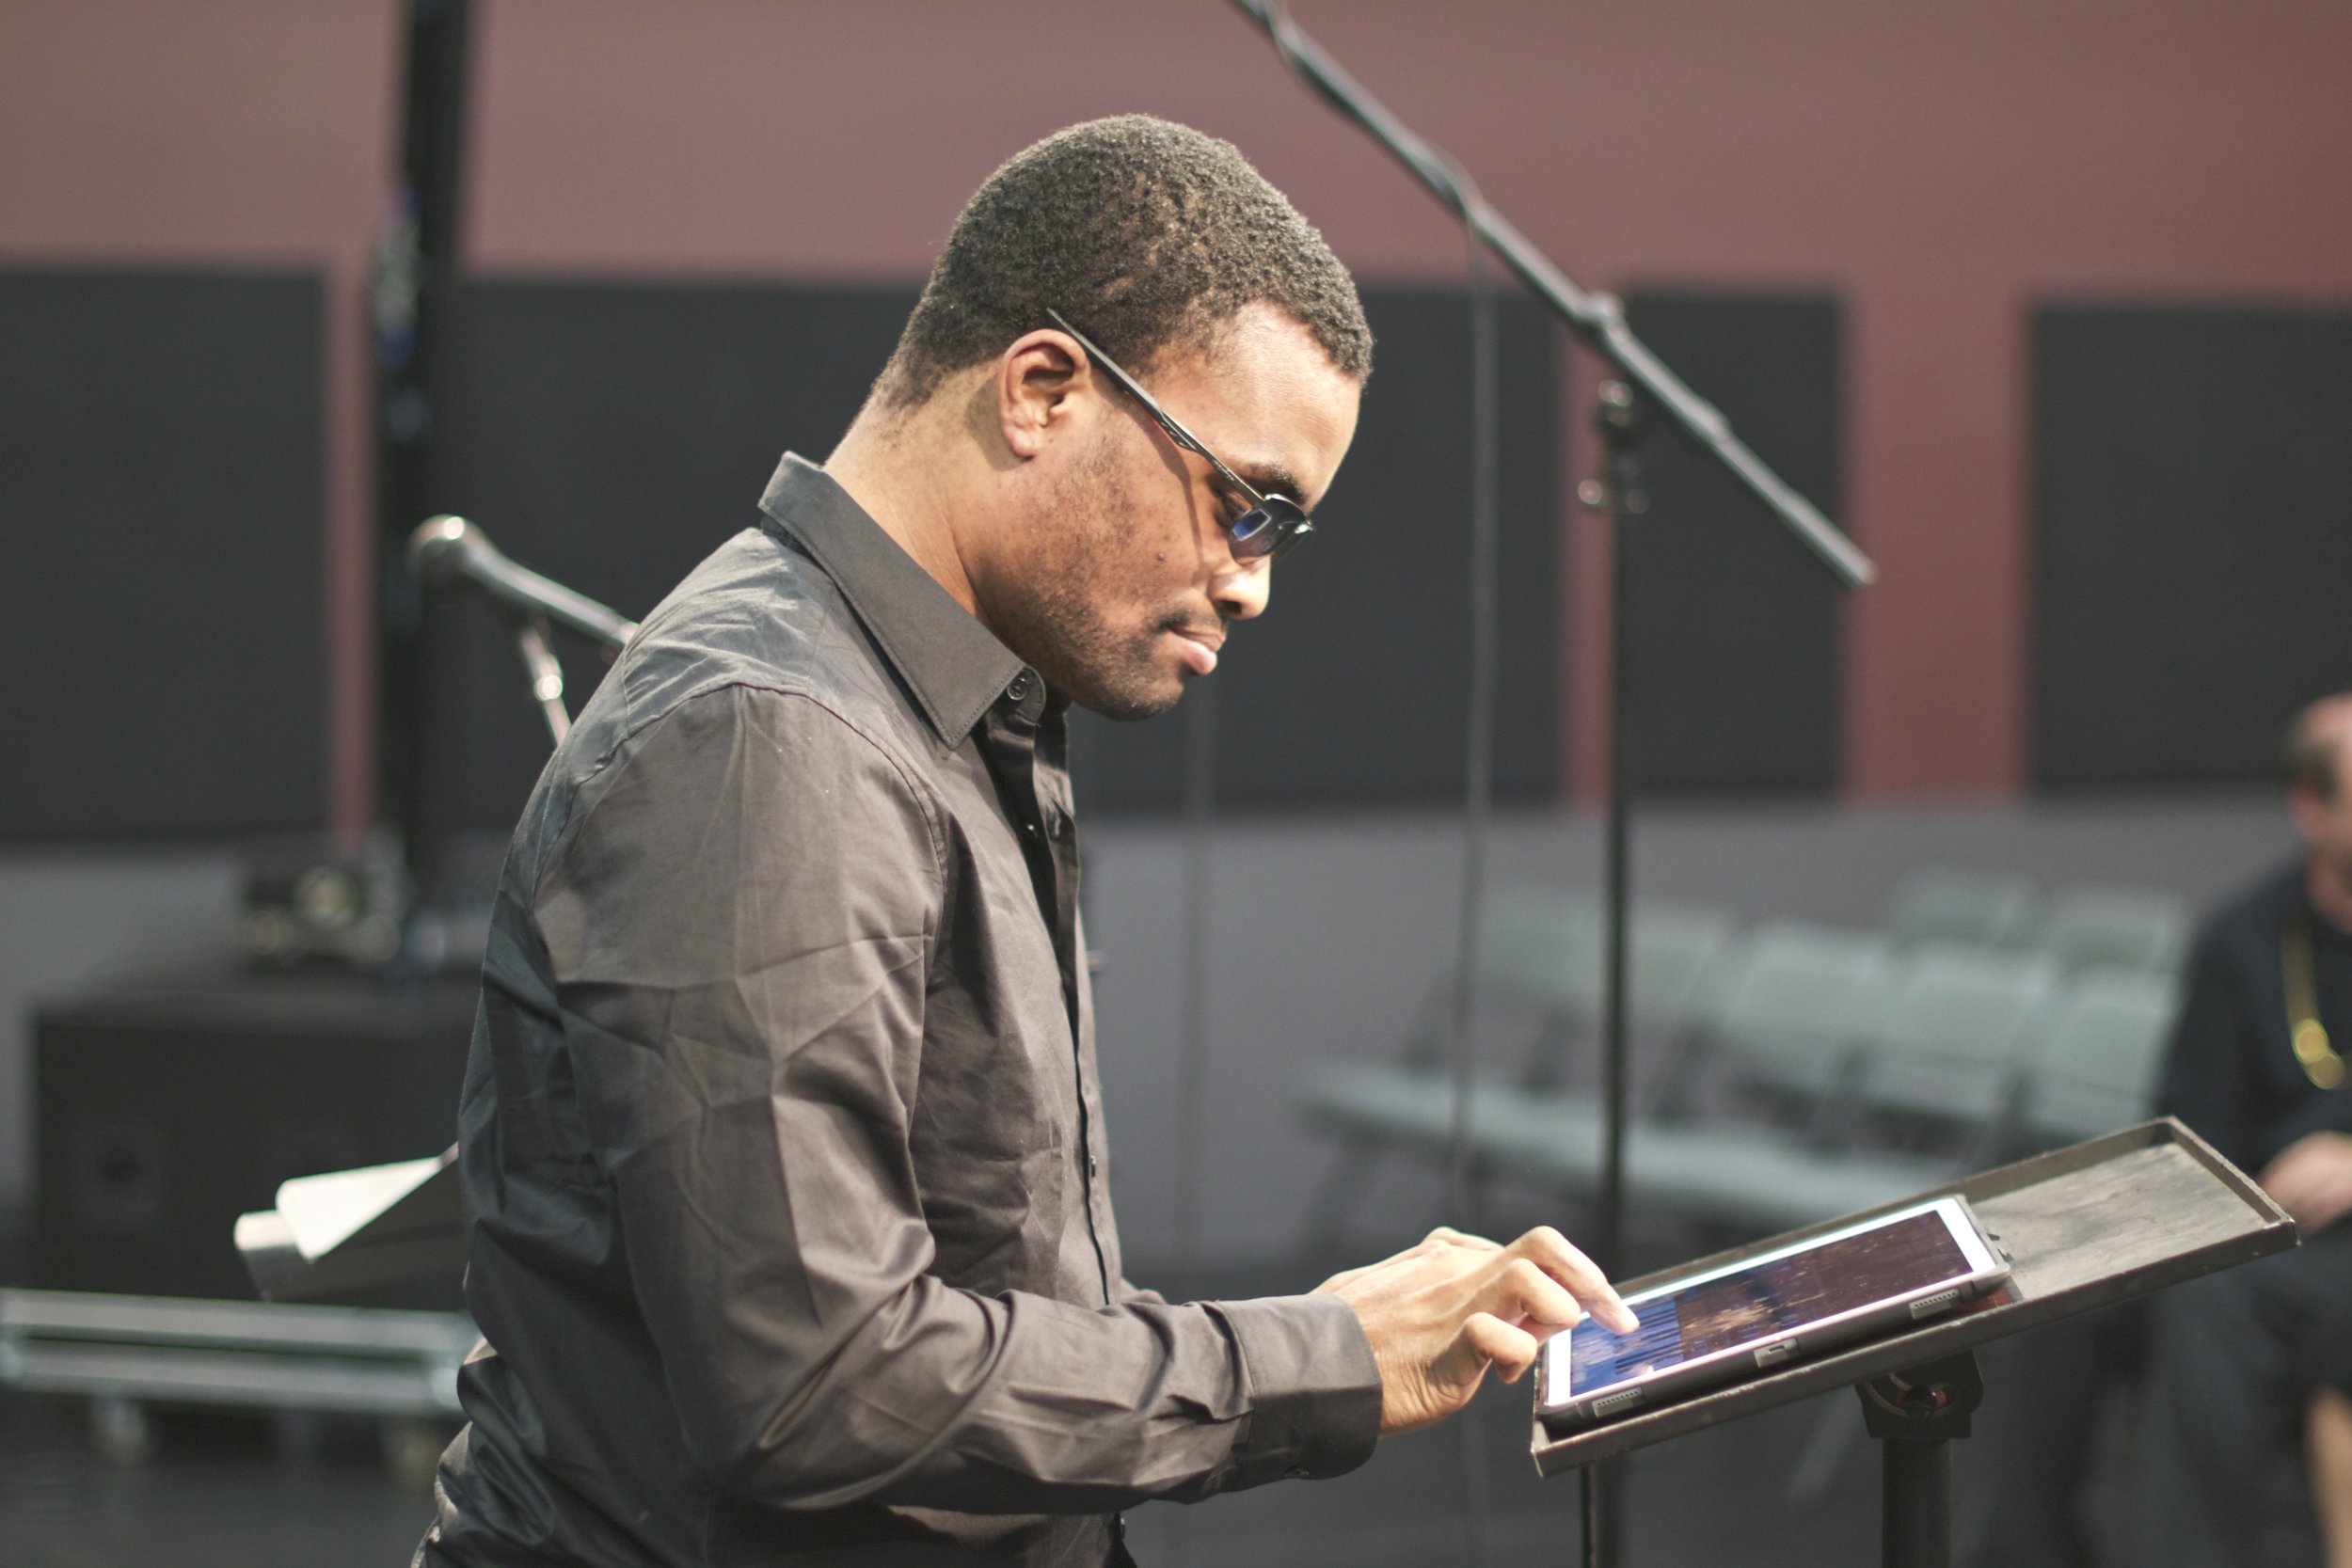 Man with dark glasses seen from the side, touching an ipad which sits on a music stand